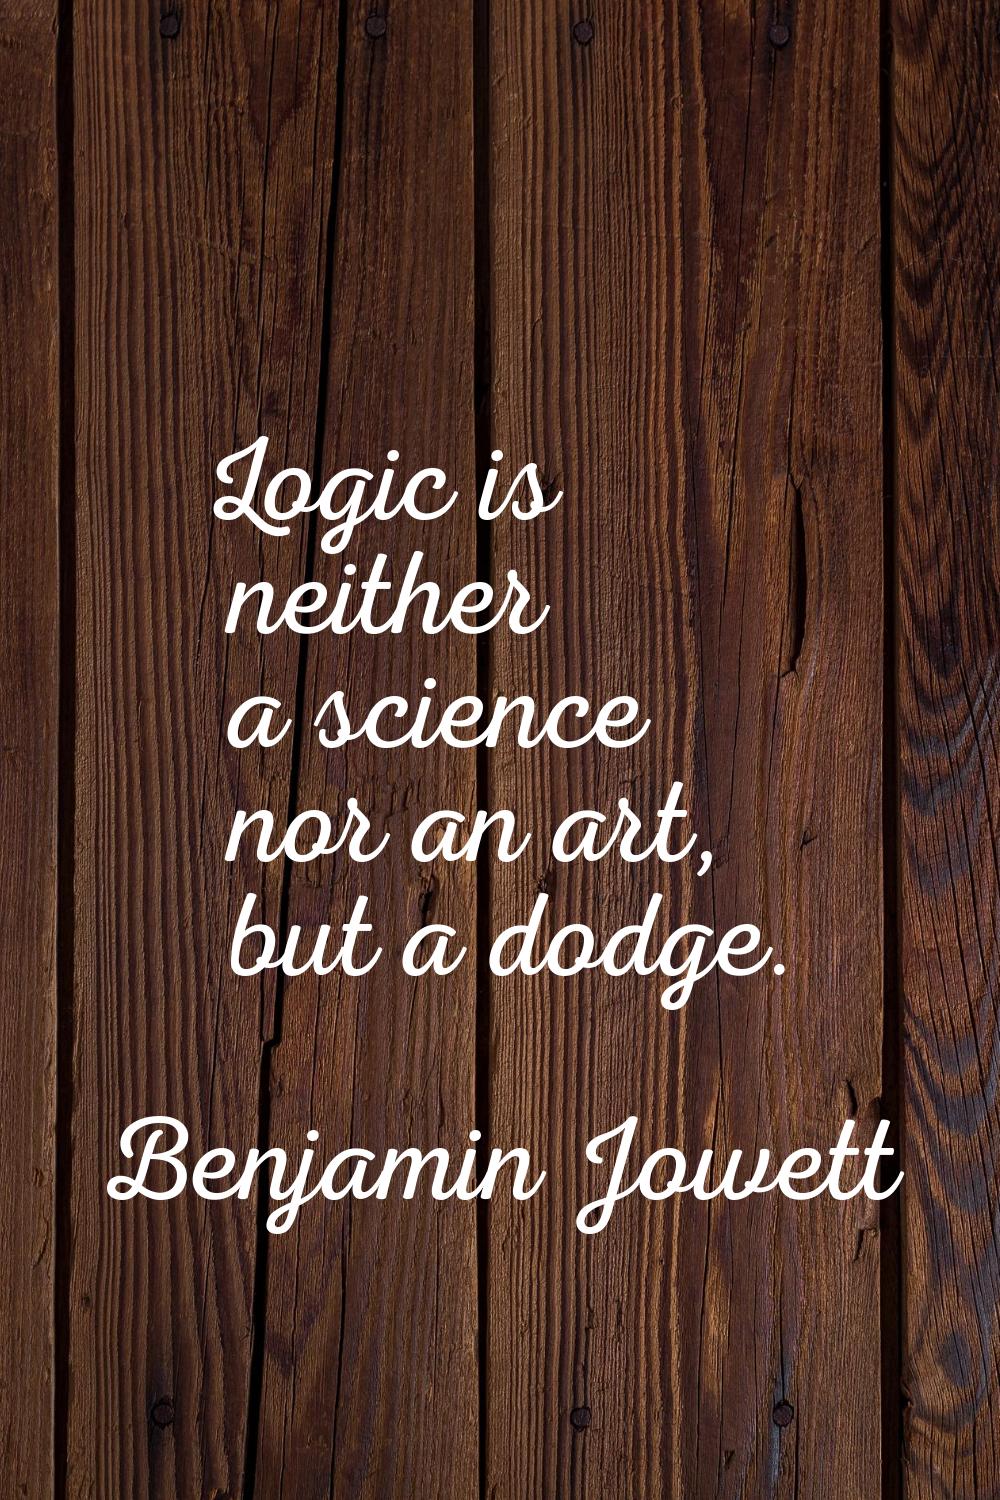 Logic is neither a science nor an art, but a dodge.